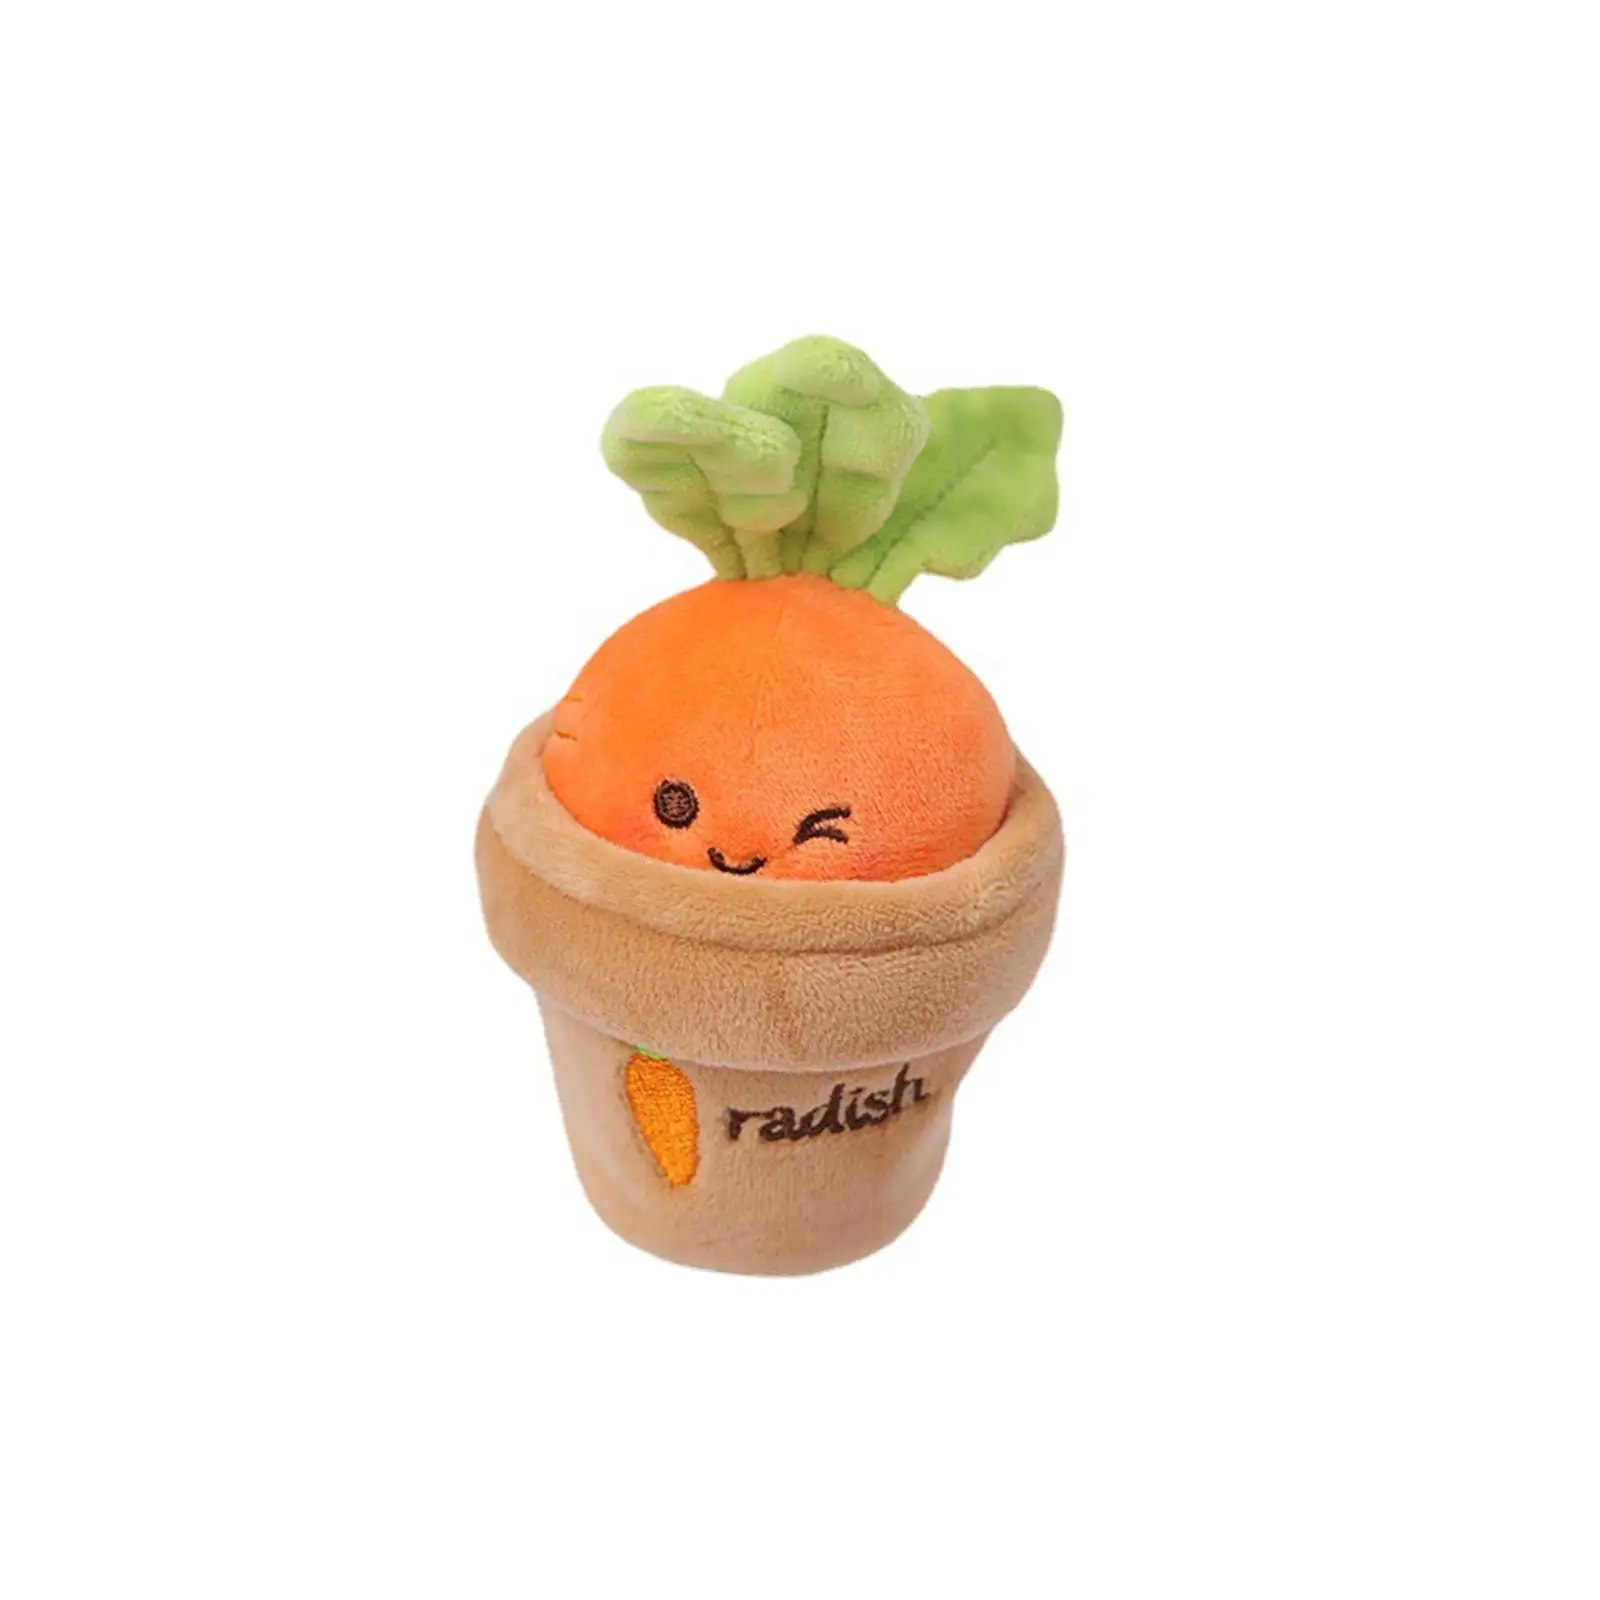 Carrot Plush Toy Keyrings Figure Soft Stuffed Doll Funny for Backpack Home Room Gift